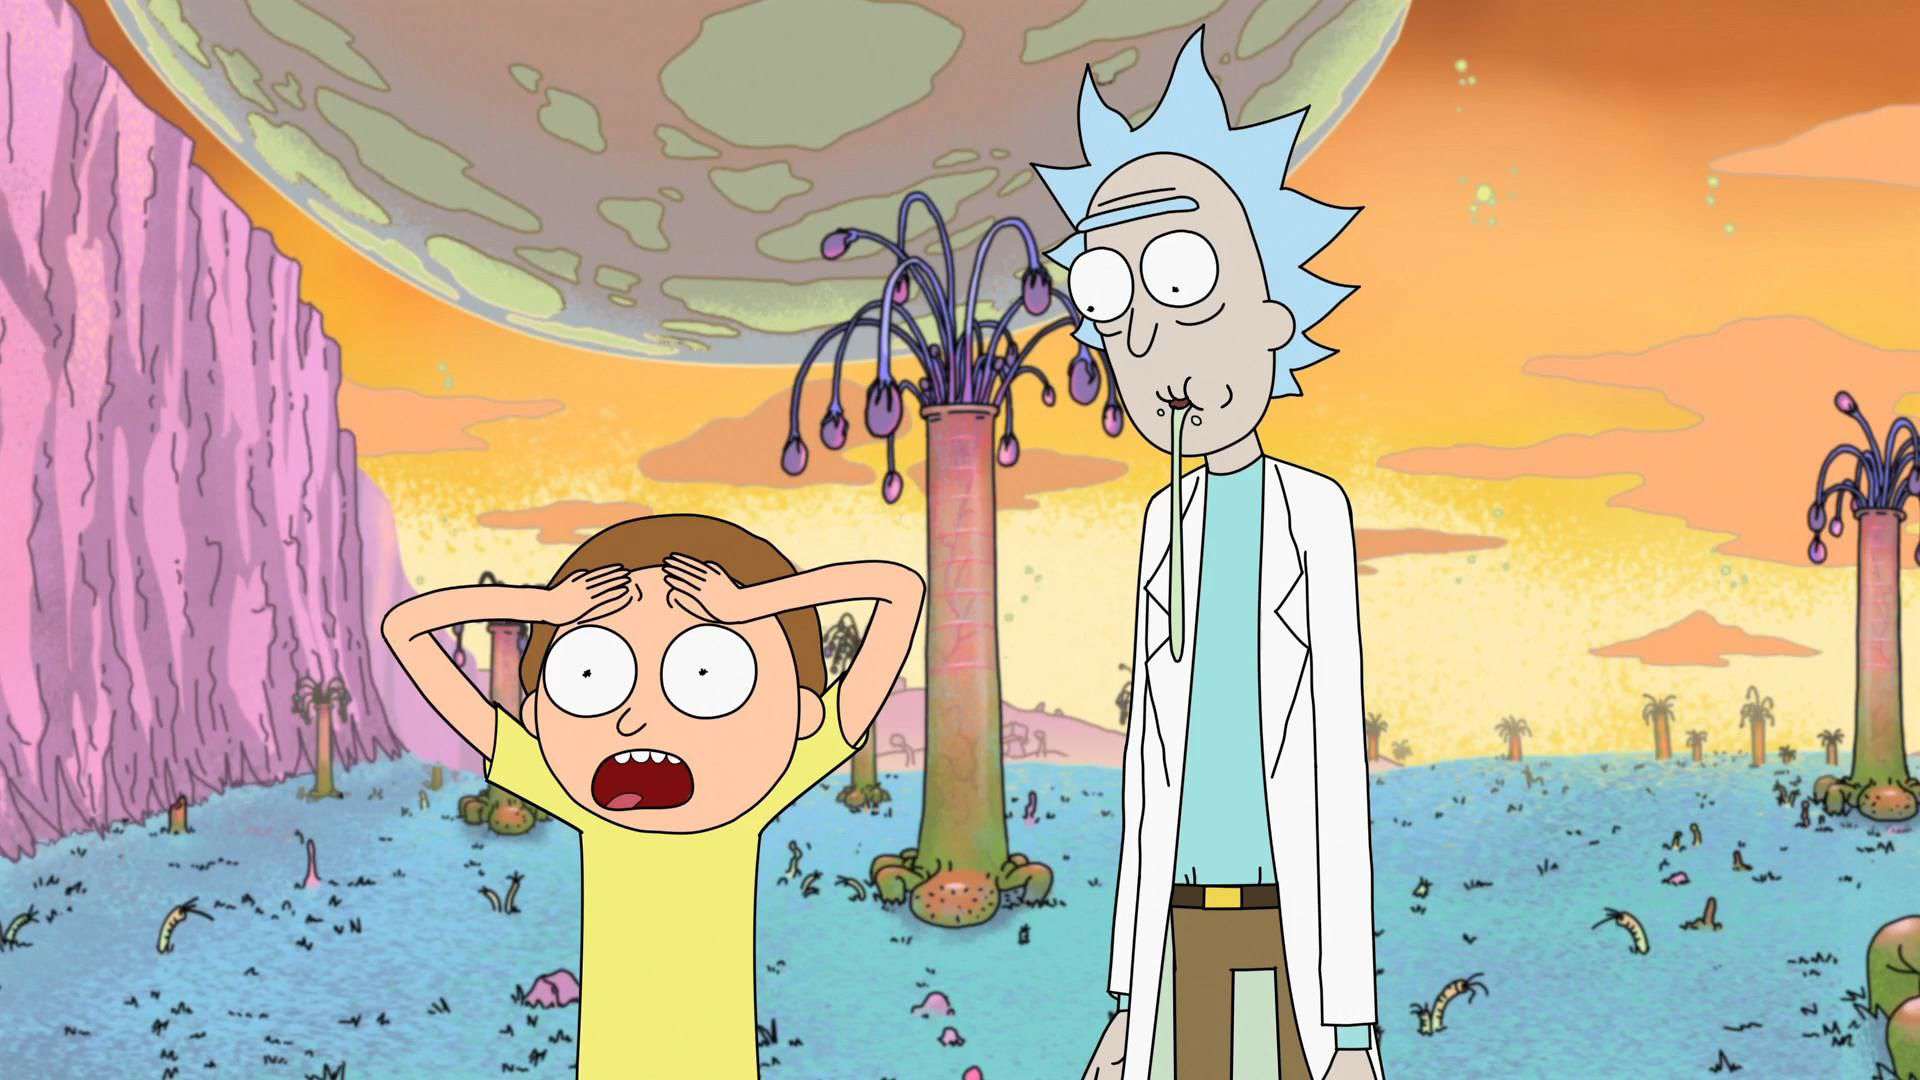 rick and morty season 4 release date announcement